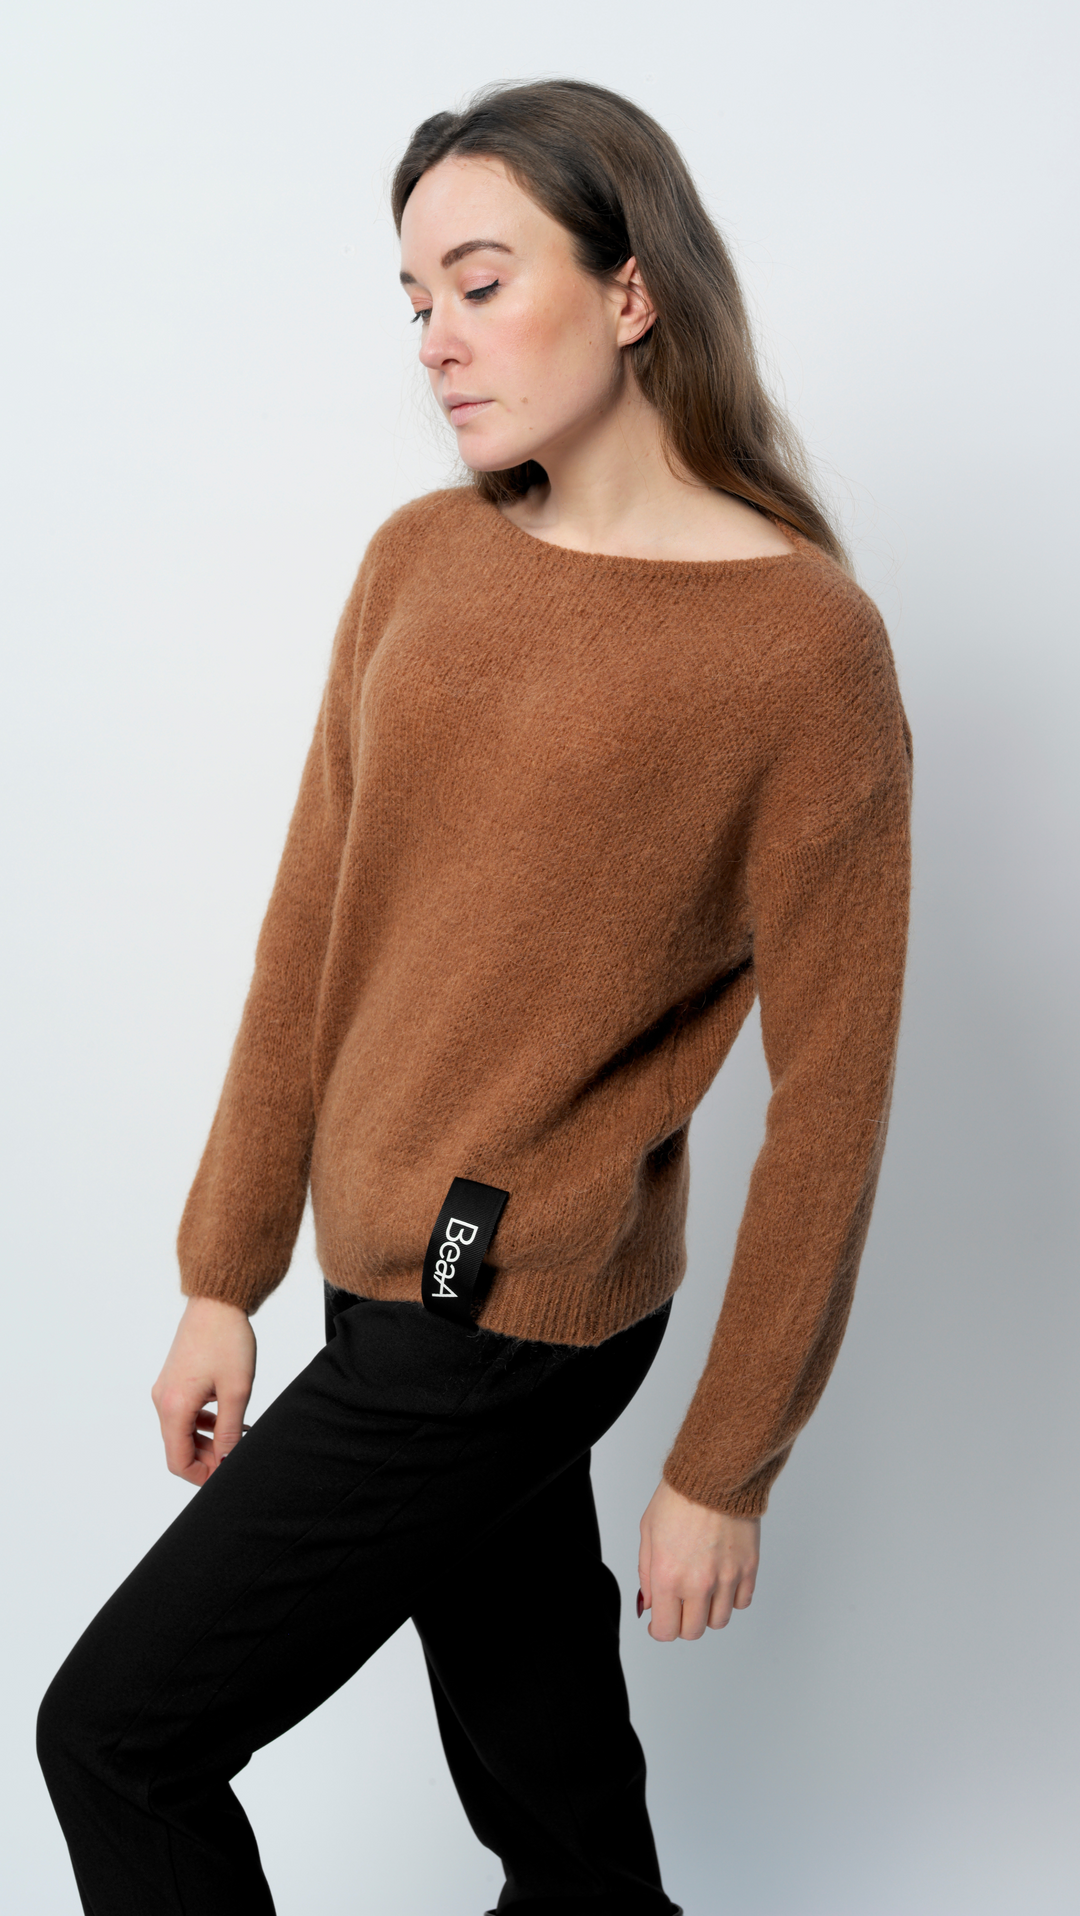 Bronze color sweater BeaA - Be At Home with Yourself